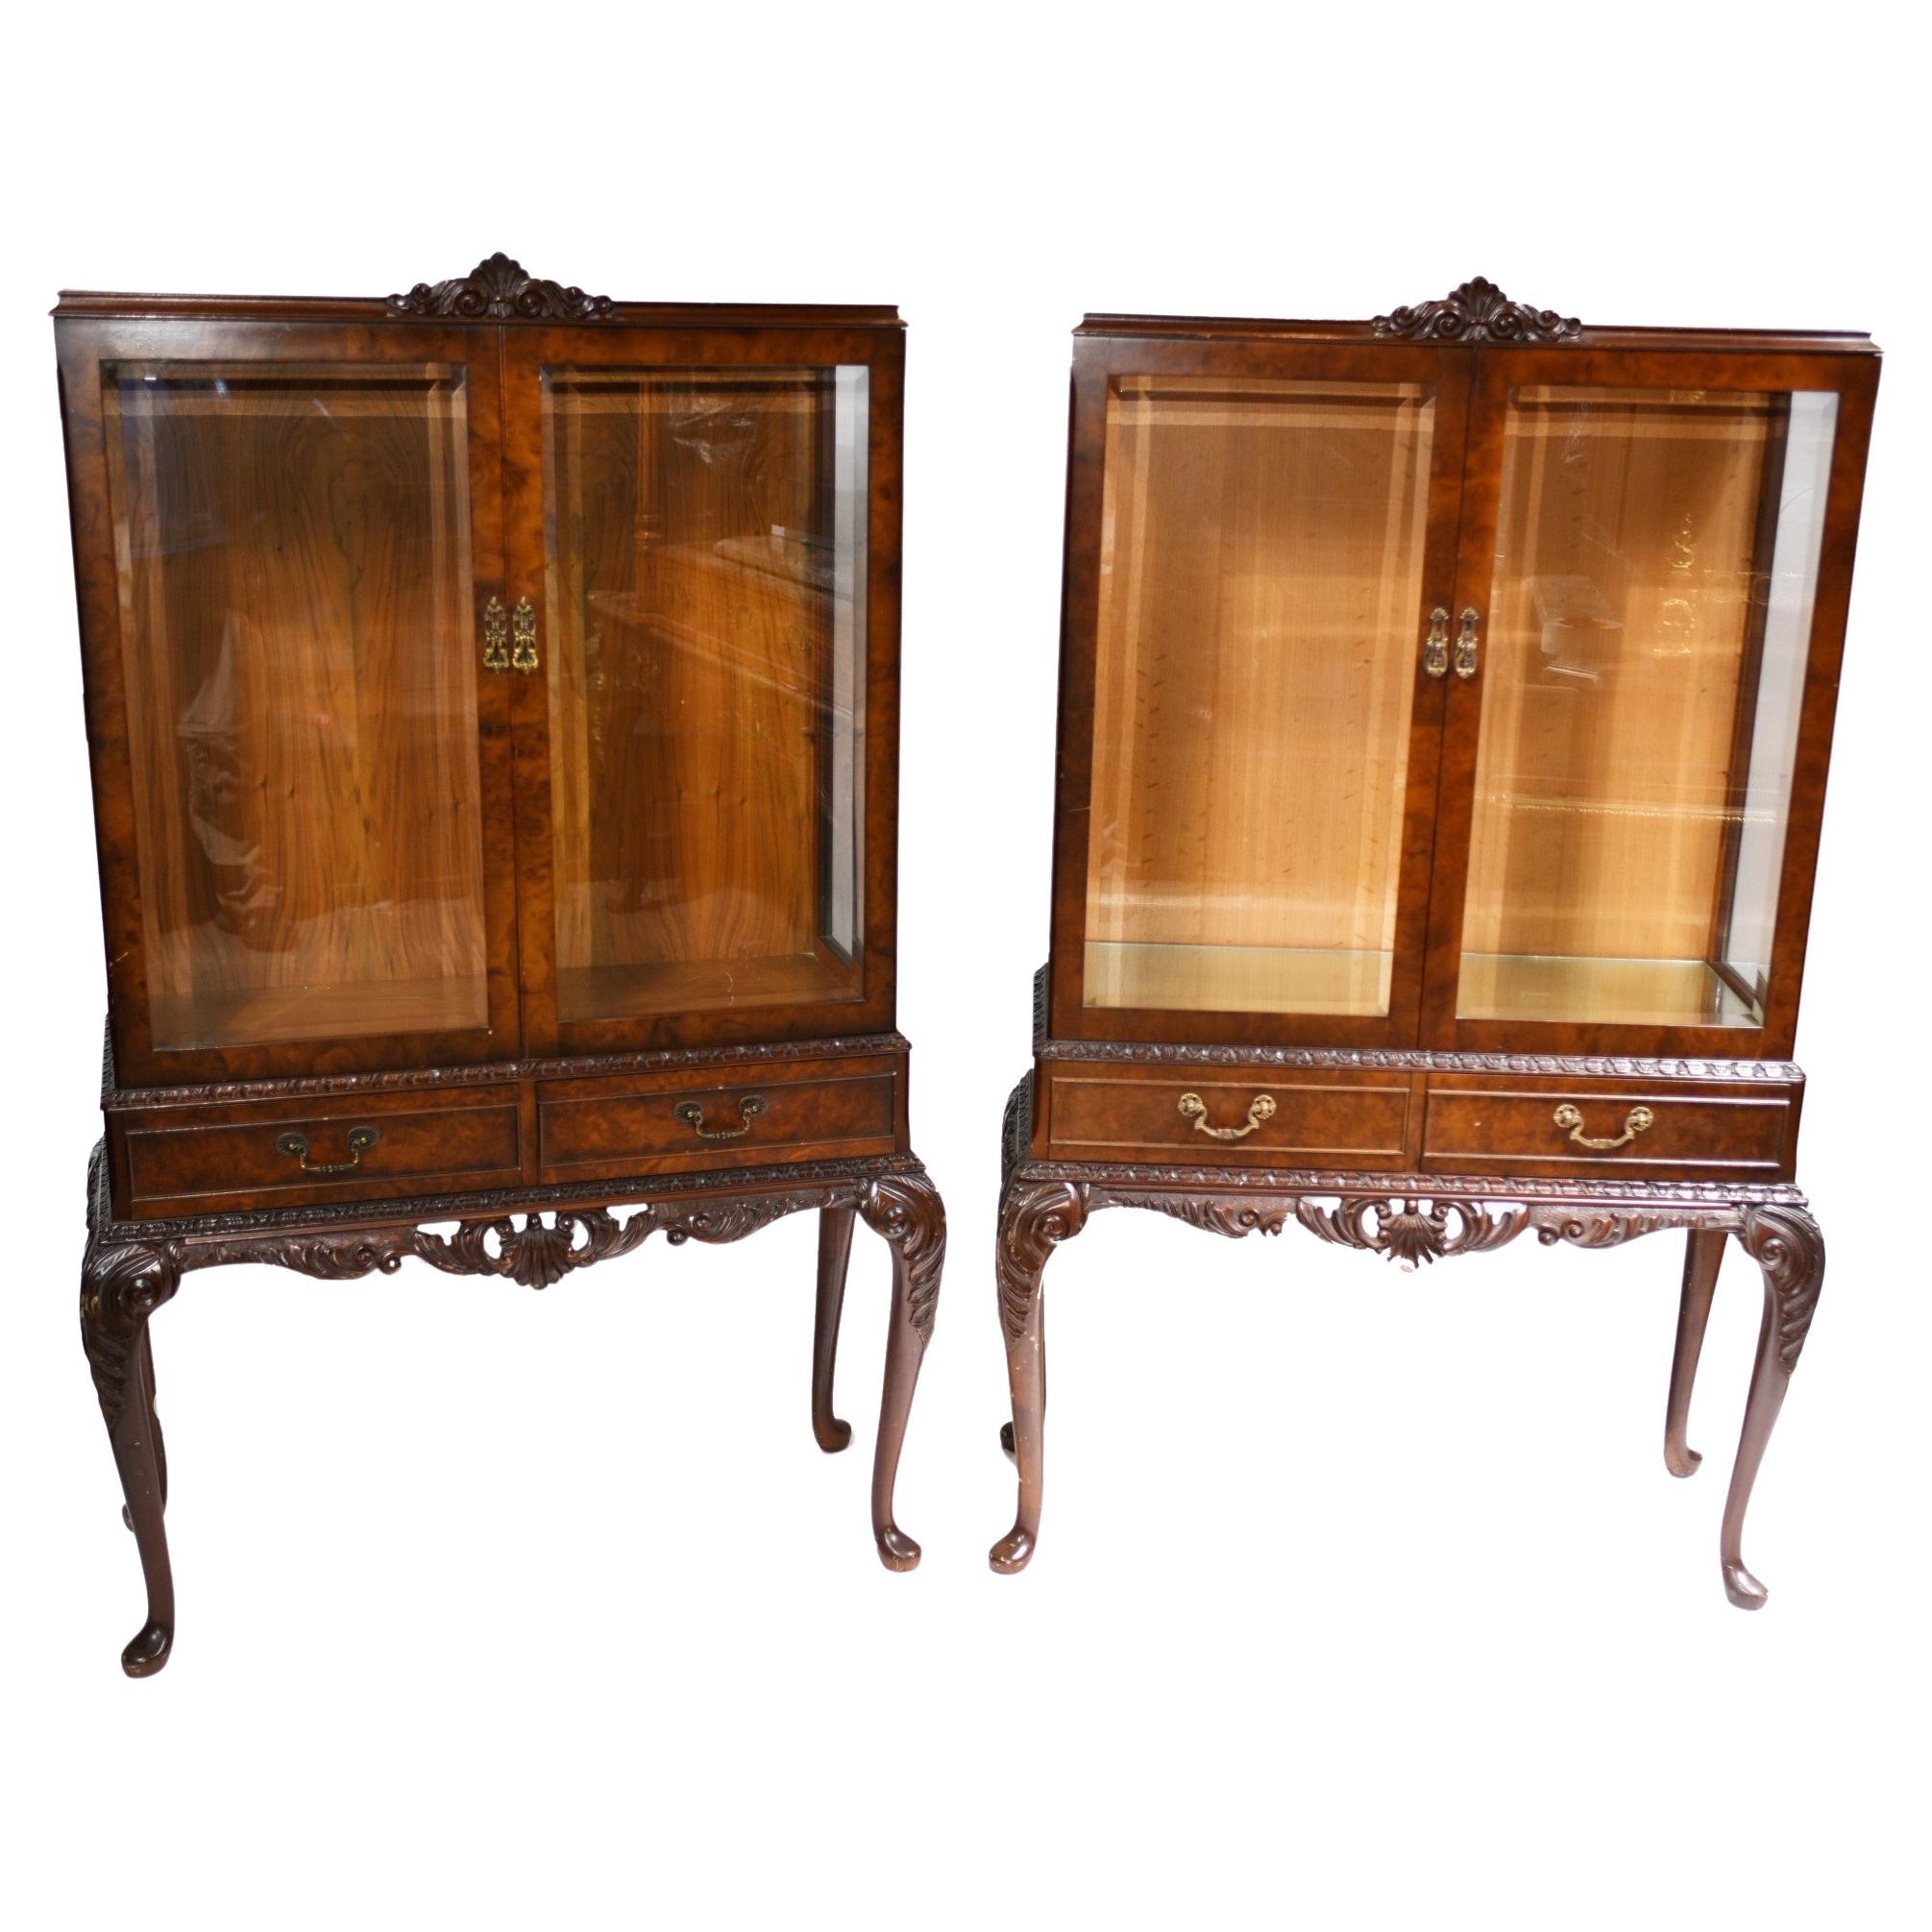 Pair Antique Display Cabinets, Walnut Victorian Bookcases